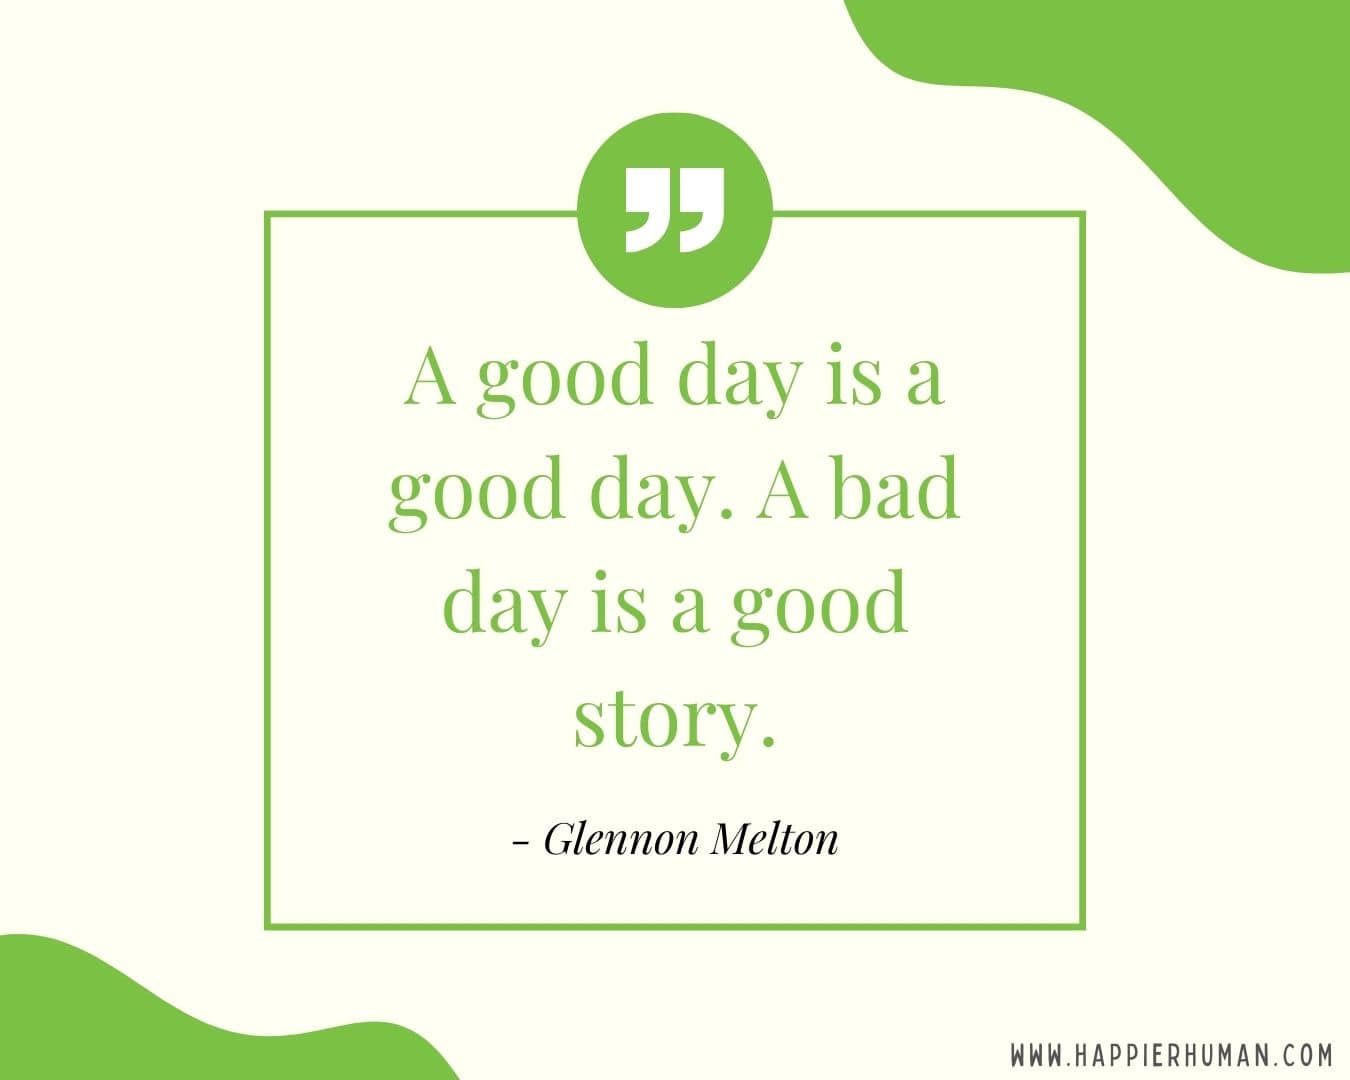 Great Day Quotes - “A good day is a good day. A bad day is a good story.” – Glennon Melton